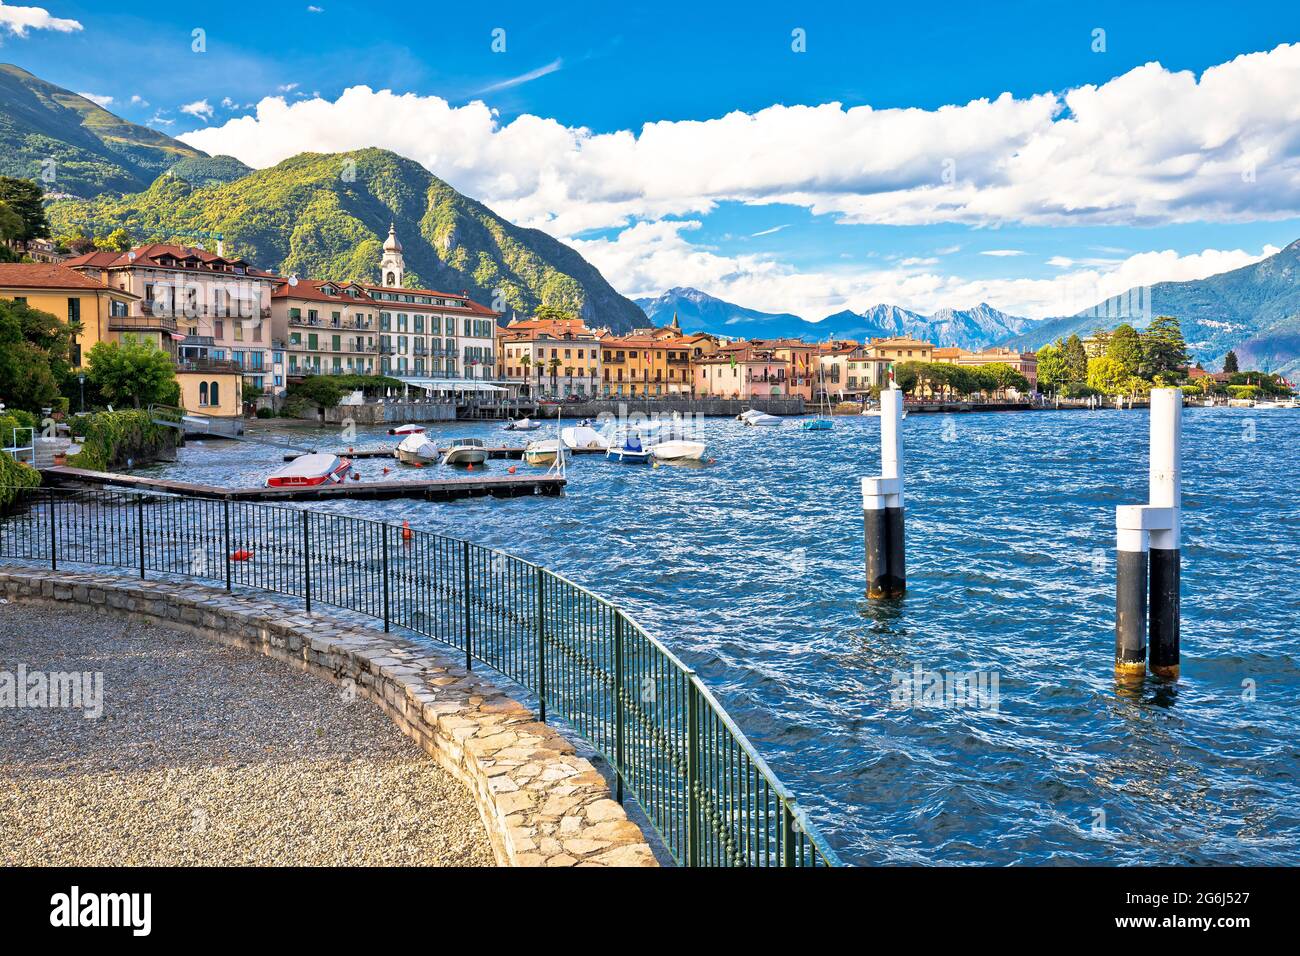 Town of Menaggio on Como lake waterfront view, Lombardy region of Italy Stock Photo